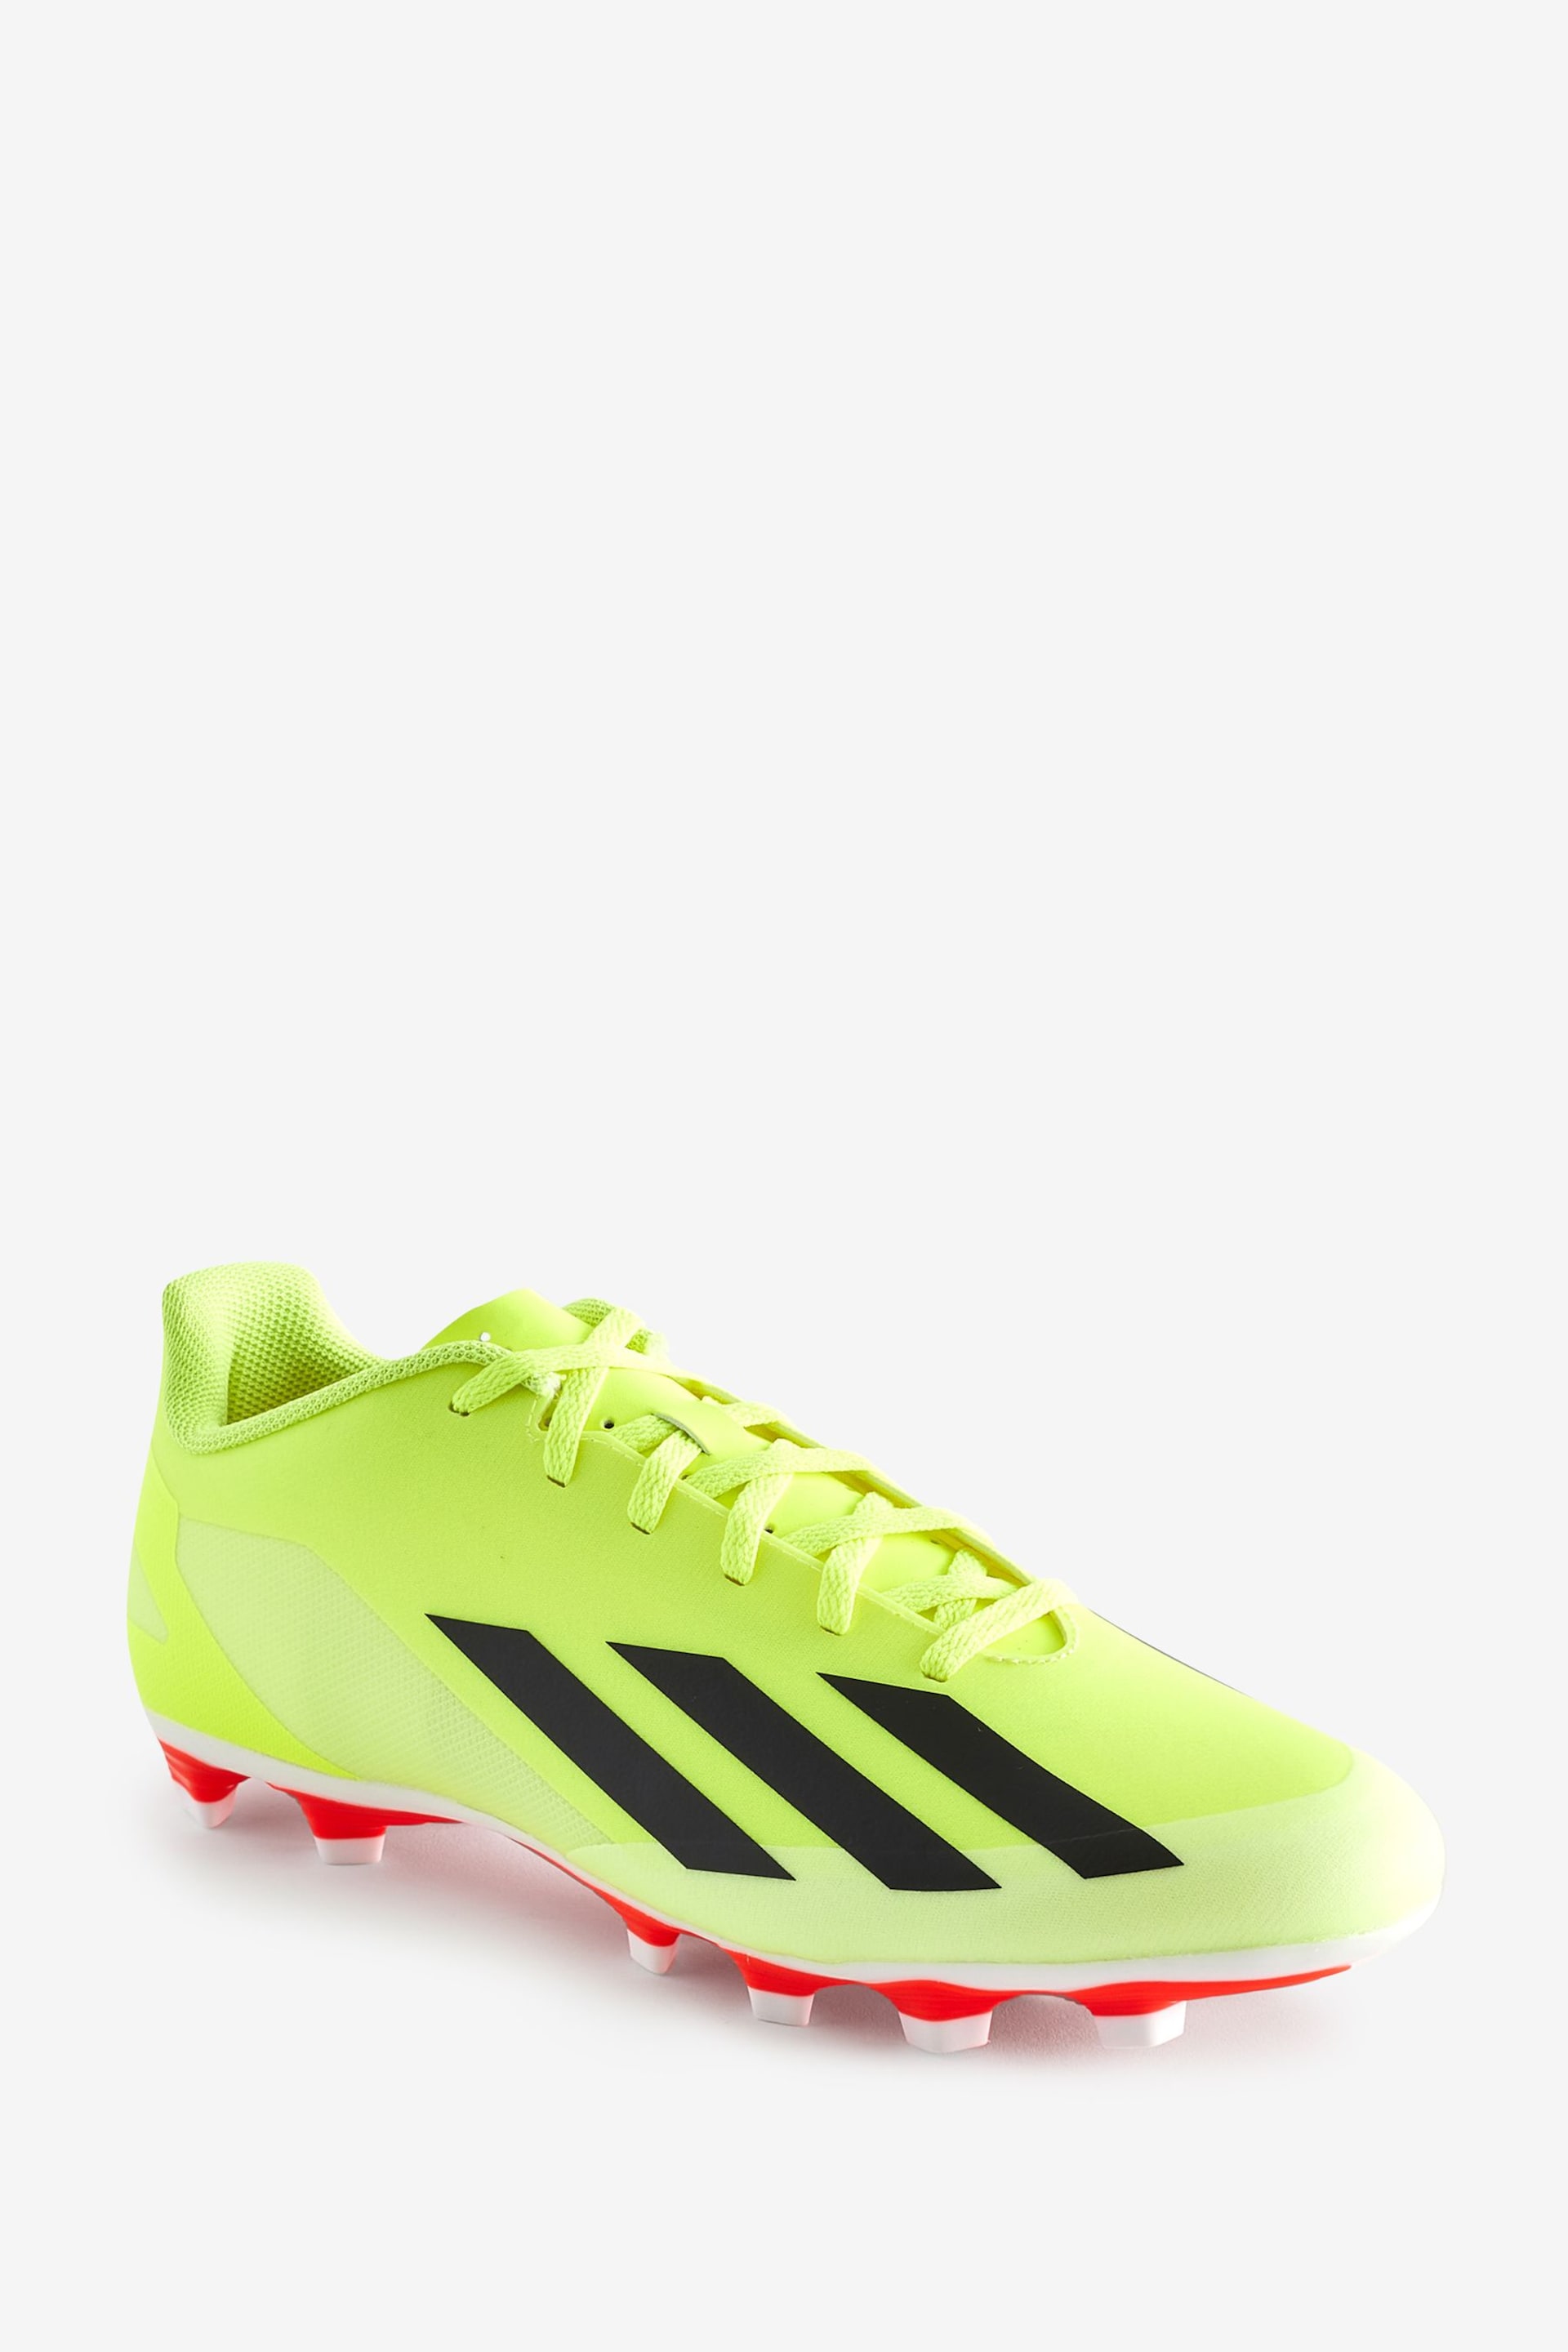 adidas Yellow Football X Crazyfast Club Flexible Ground Adult Boots - Image 3 of 6